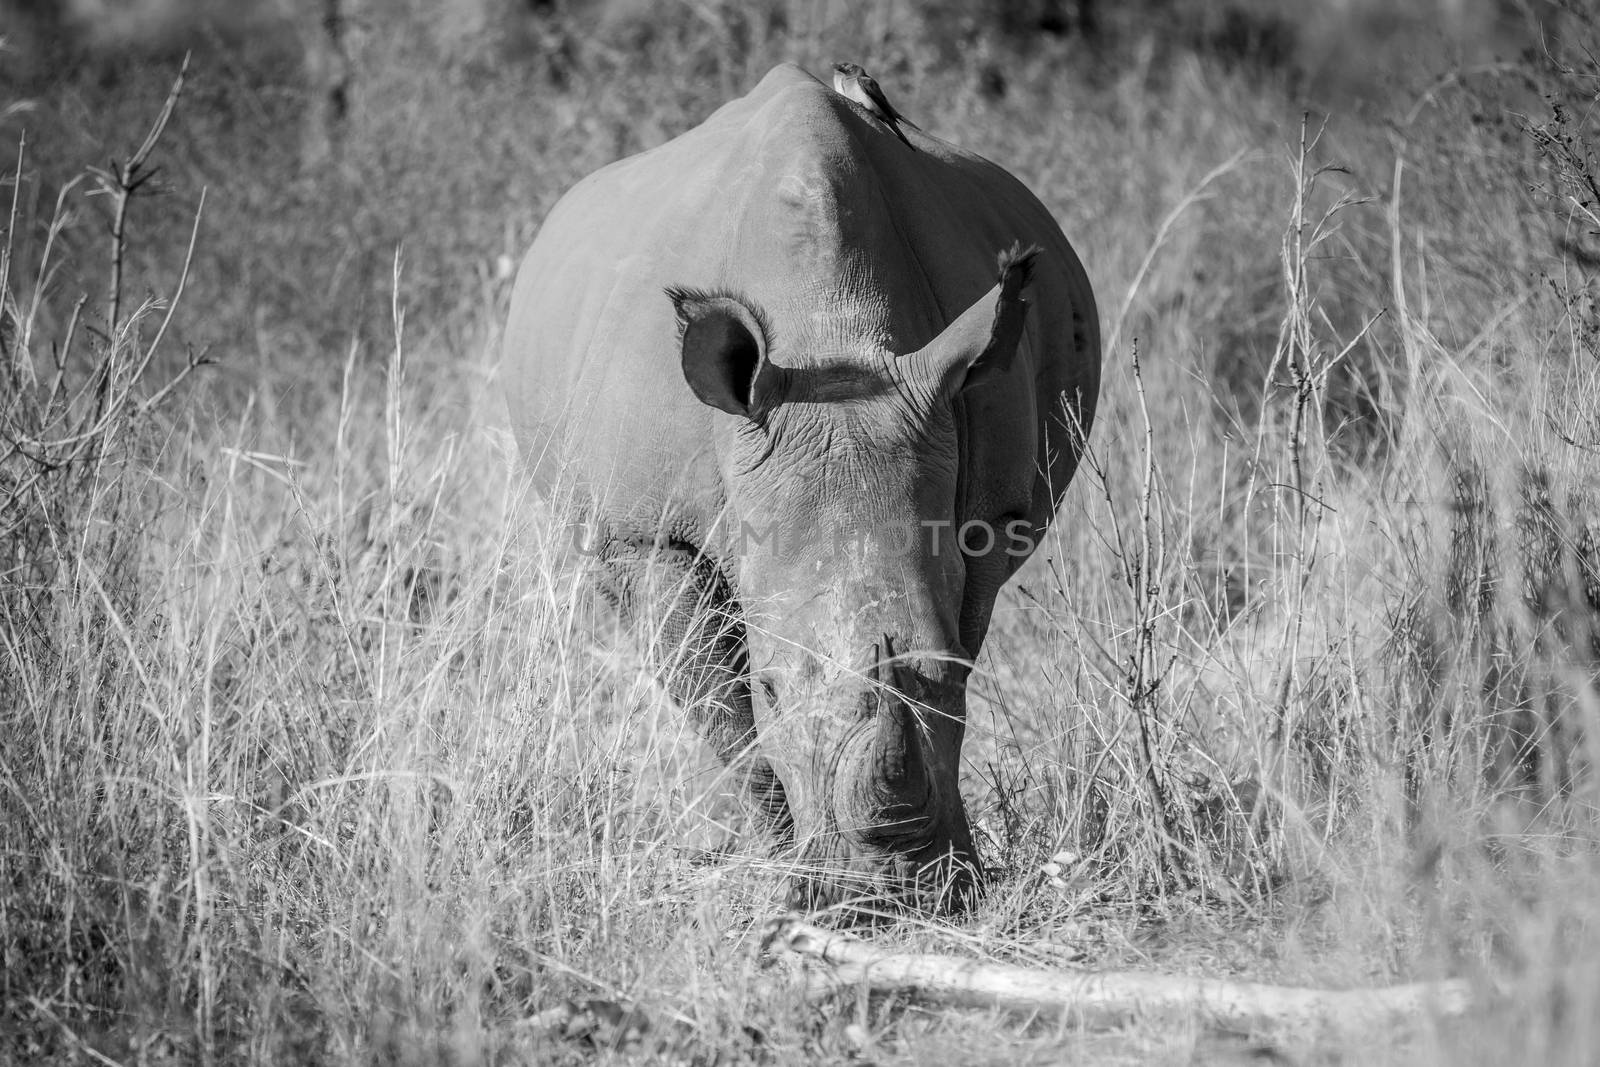 White rhino standing and grazing in the high grass in black and white, South Africa.